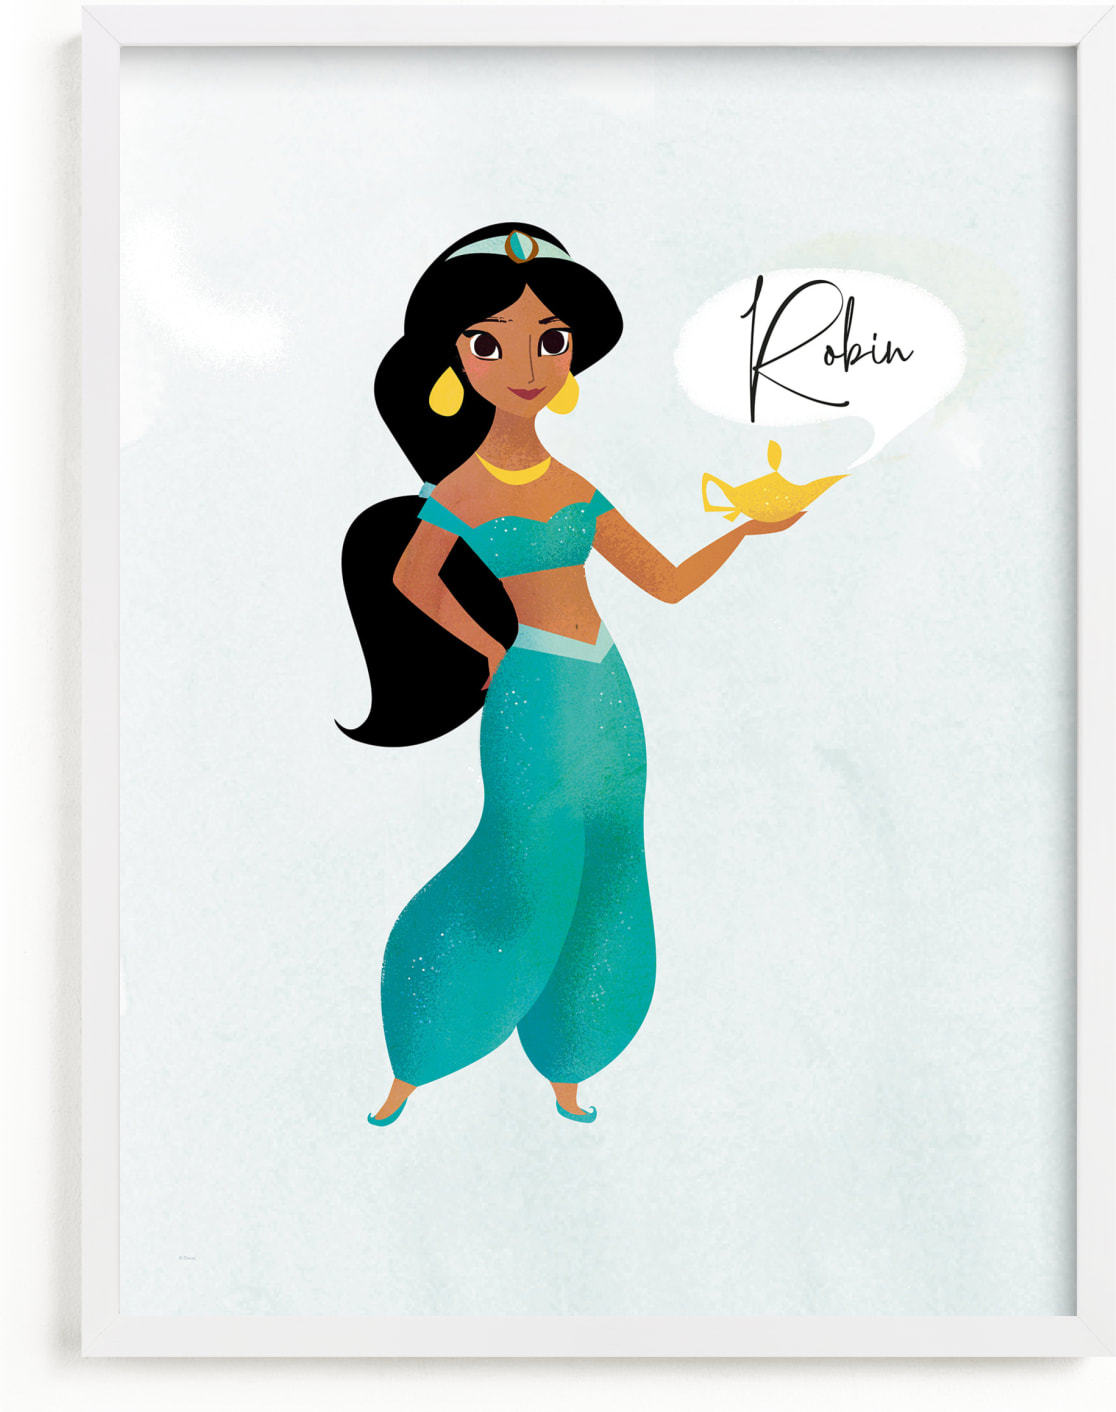 This is a blue disney art by Lori Wemple called A Wish from Disney's Jasmine.